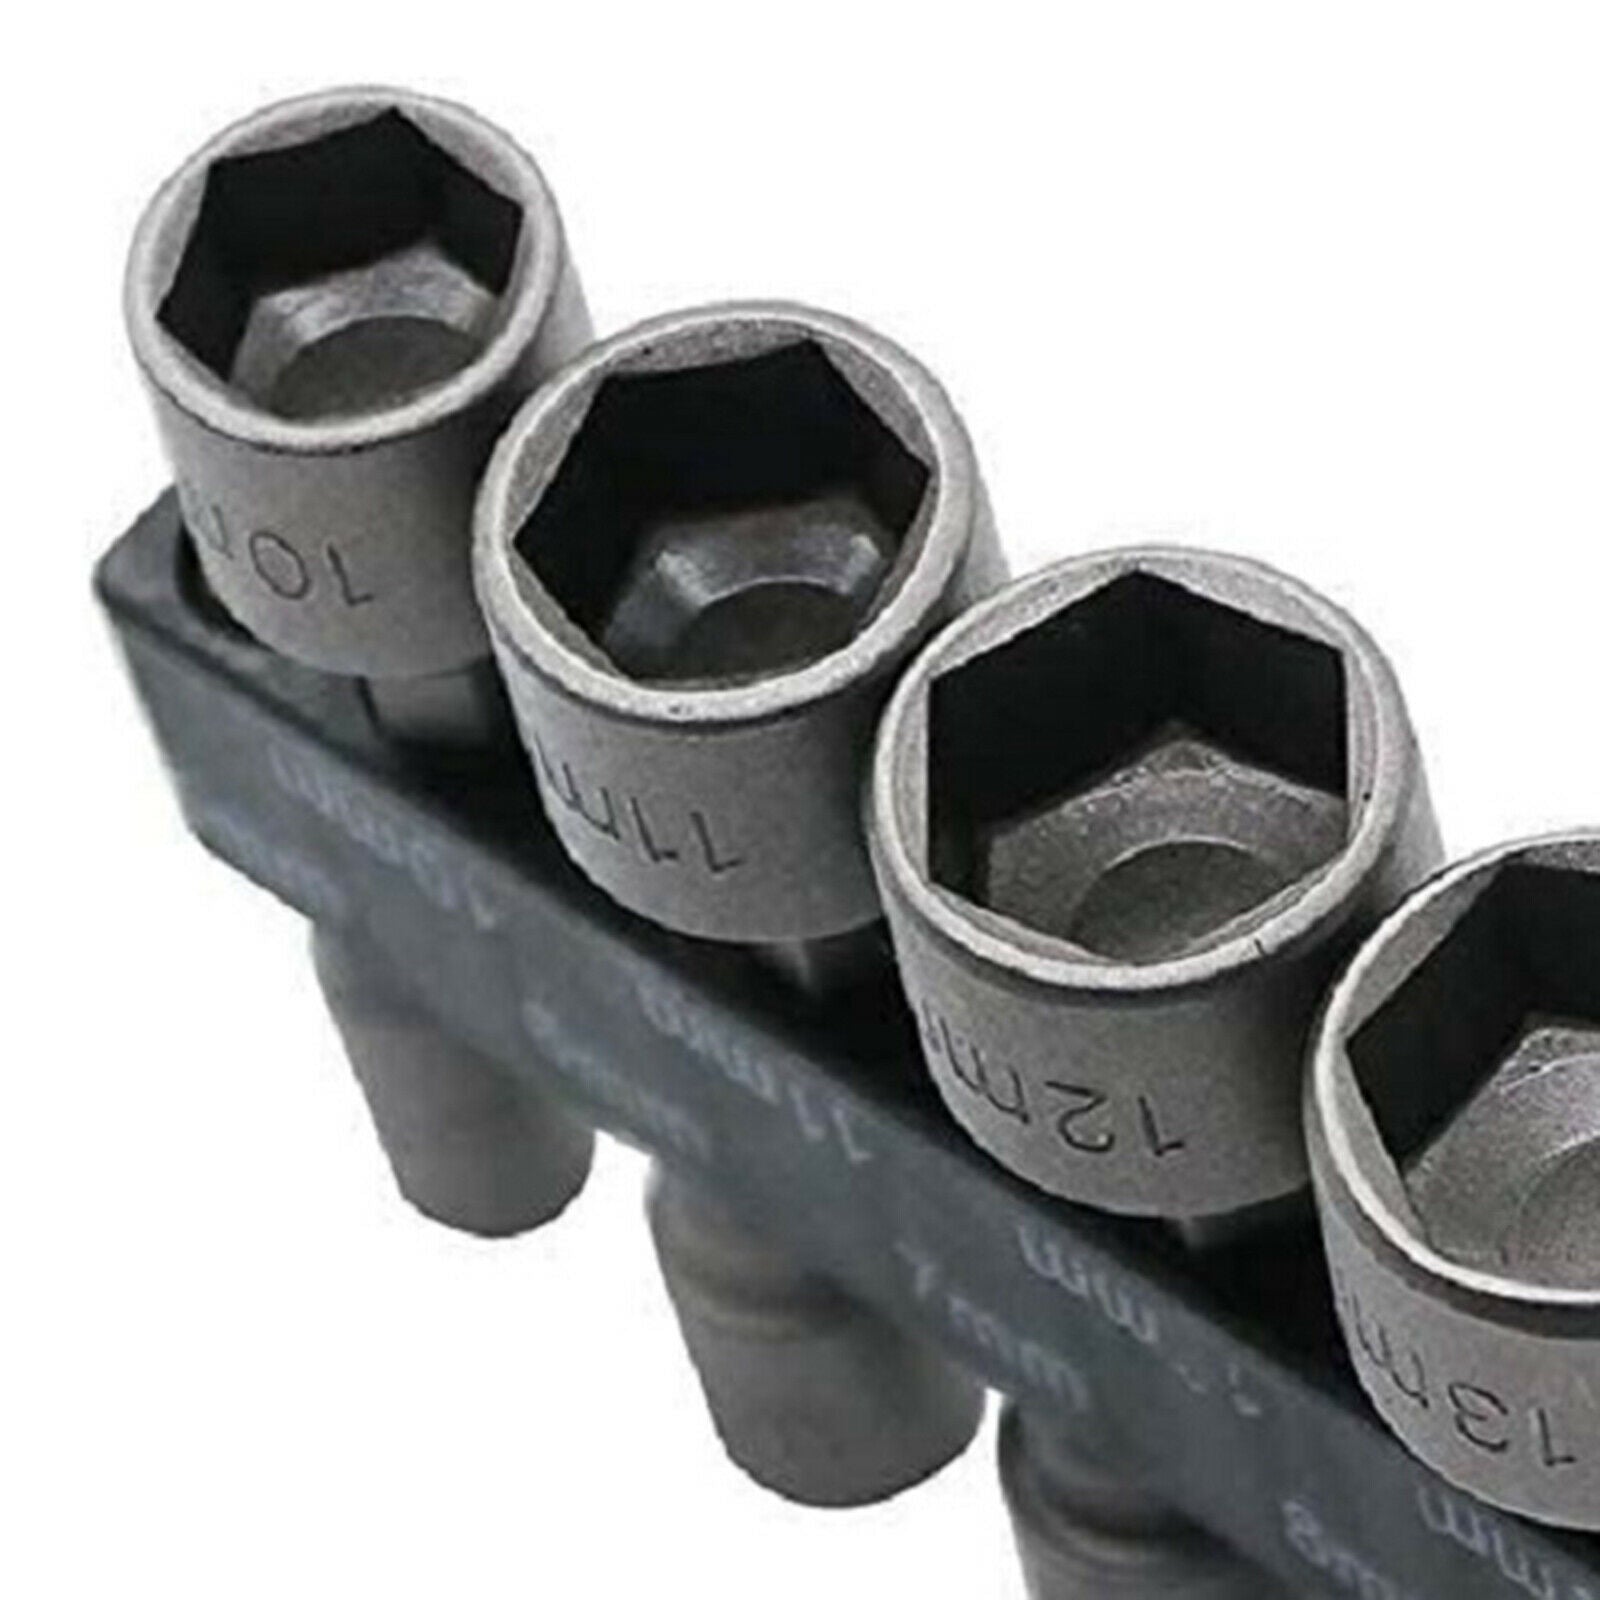 Hex Handle Socket Set Extension Air Nuts Spanner Household Tools 7.5x5x1.8cm